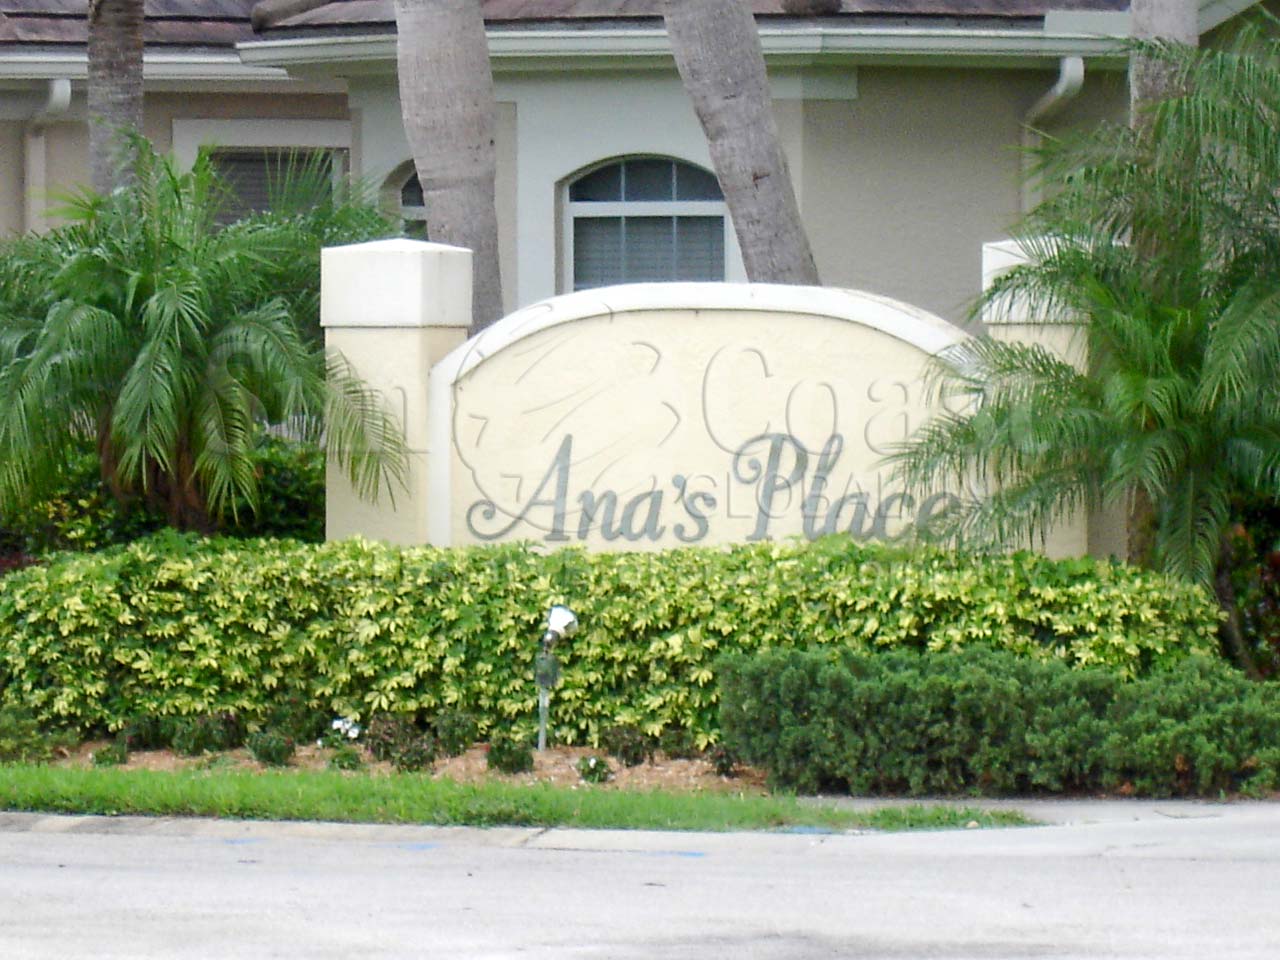 Anas Place sign